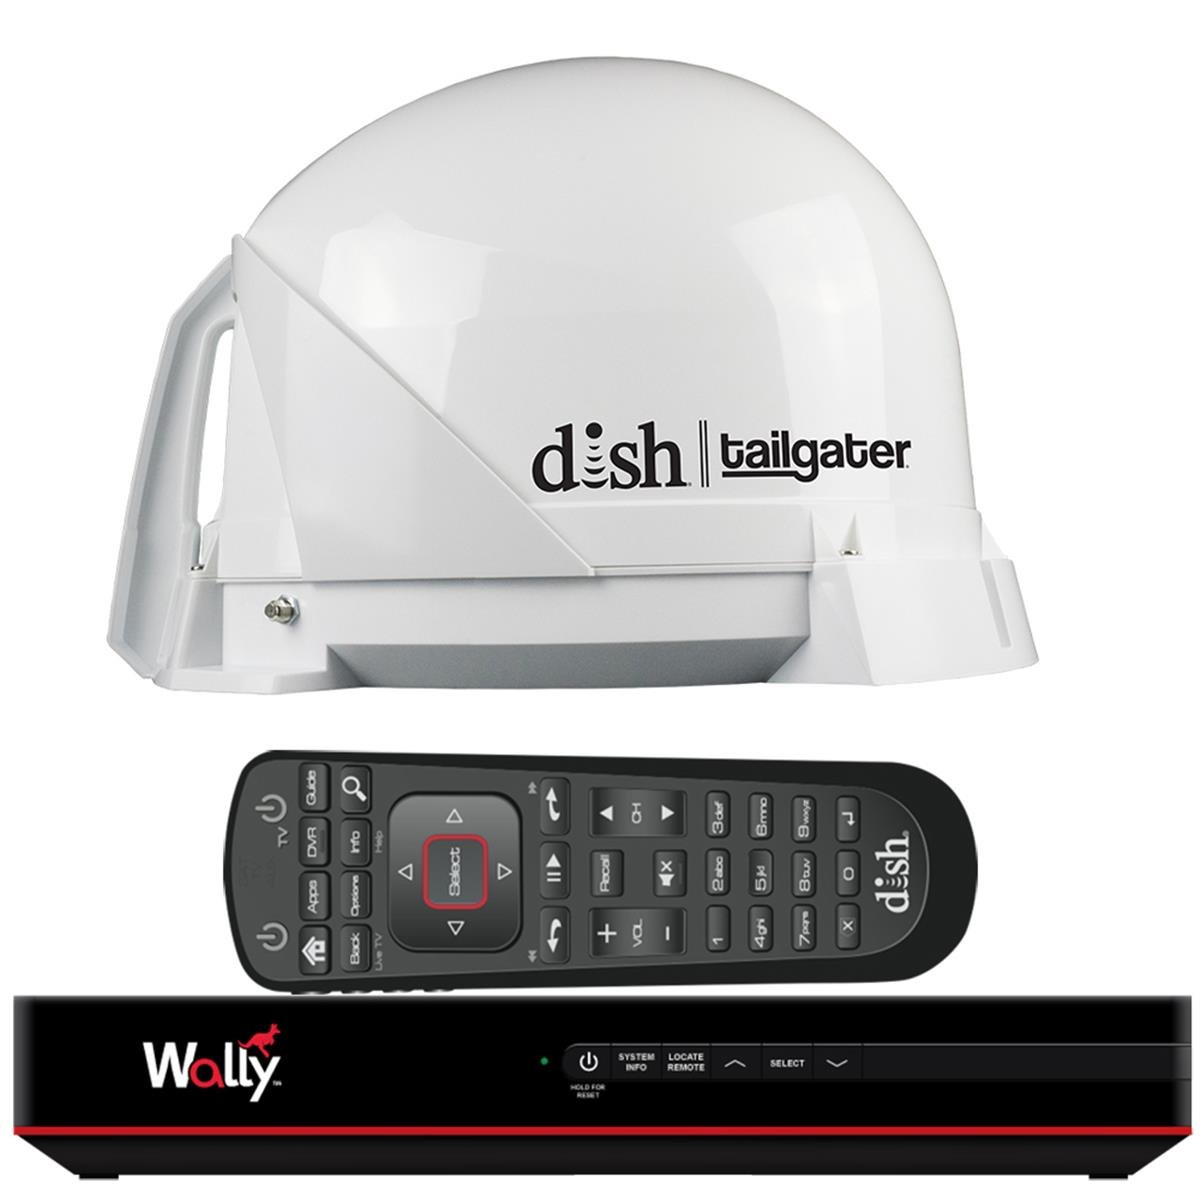 Picture of King DT4450 Dish Tailgater Satellite TV Antenna Bundle with Dish Wally HD Receiver & Cables